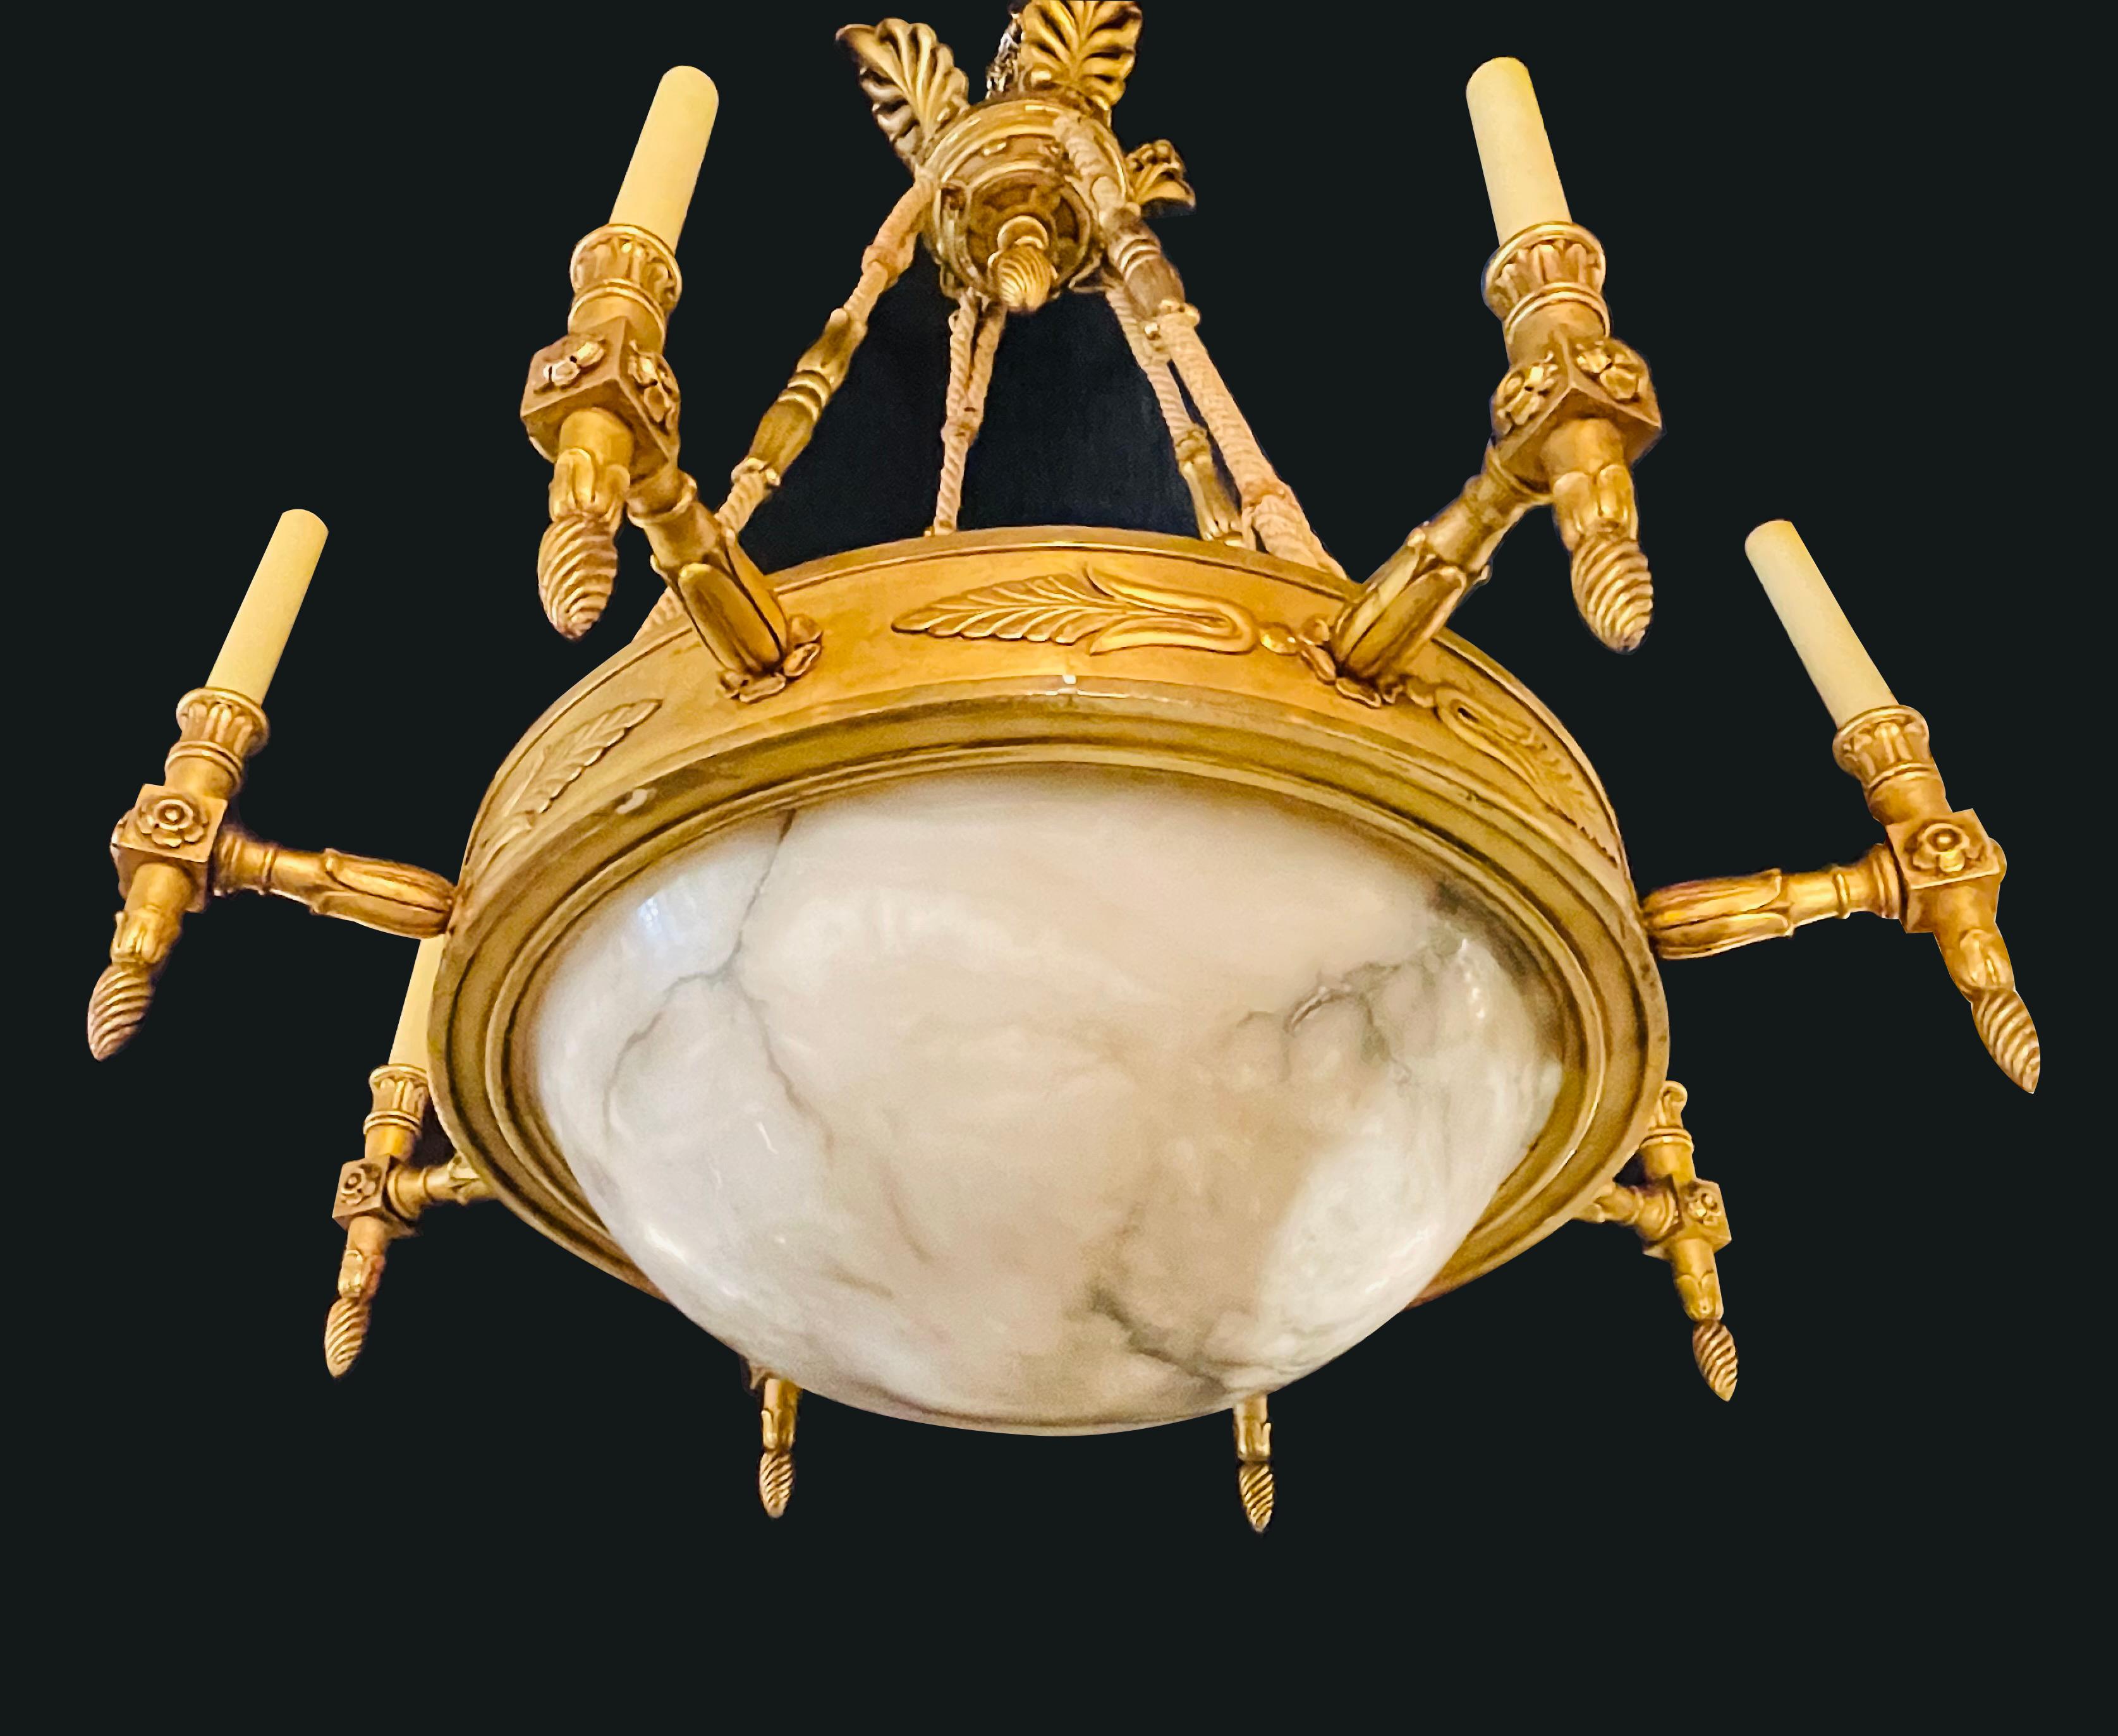 19th-20th century alabaster and giltwood chandelier. A stunning neoclassical chandelier having a large domed alabaster globe supported by a finely carved giltwood apron with eight giltwood carved candelabras lights. The whole suspended by rope and